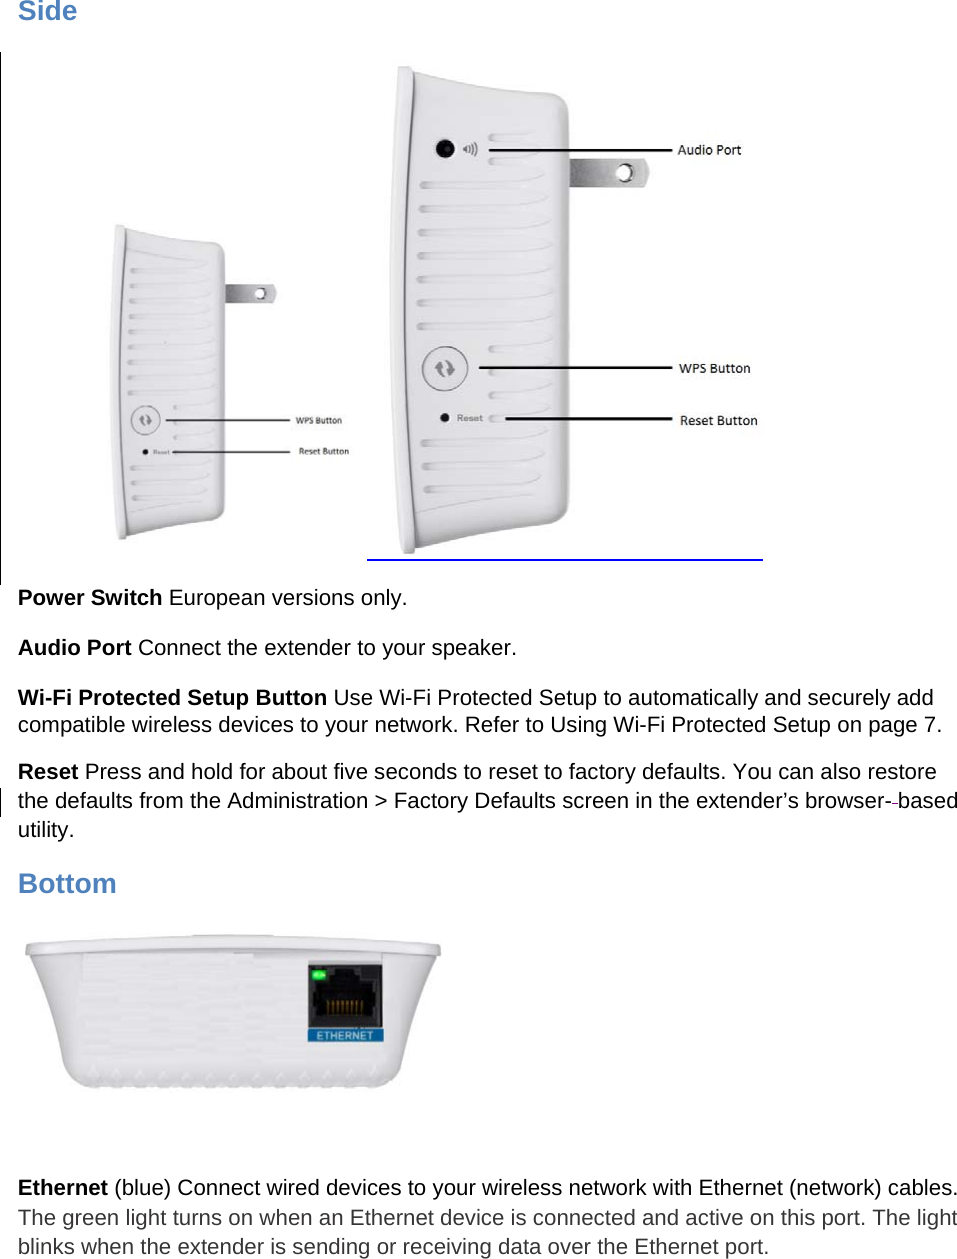 Side  Power Switch European versions only. Audio Port Connect the extender to your speaker. Wi-Fi Protected Setup Button Use Wi-Fi Protected Setup to automatically and securely add compatible wireless devices to your network. Refer to Using Wi-Fi Protected Setup on page 7. Reset Press and hold for about five seconds to reset to factory defaults. You can also restore the defaults from the Administration &gt; Factory Defaults screen in the extender’s browser- based utility.  Bottom   Ethernet (blue) Connect wired devices to your wireless network with Ethernet (network) cables. The green light turns on when an Ethernet device is connected and active on this port. The light blinks when the extender is sending or receiving data over the Ethernet port. 